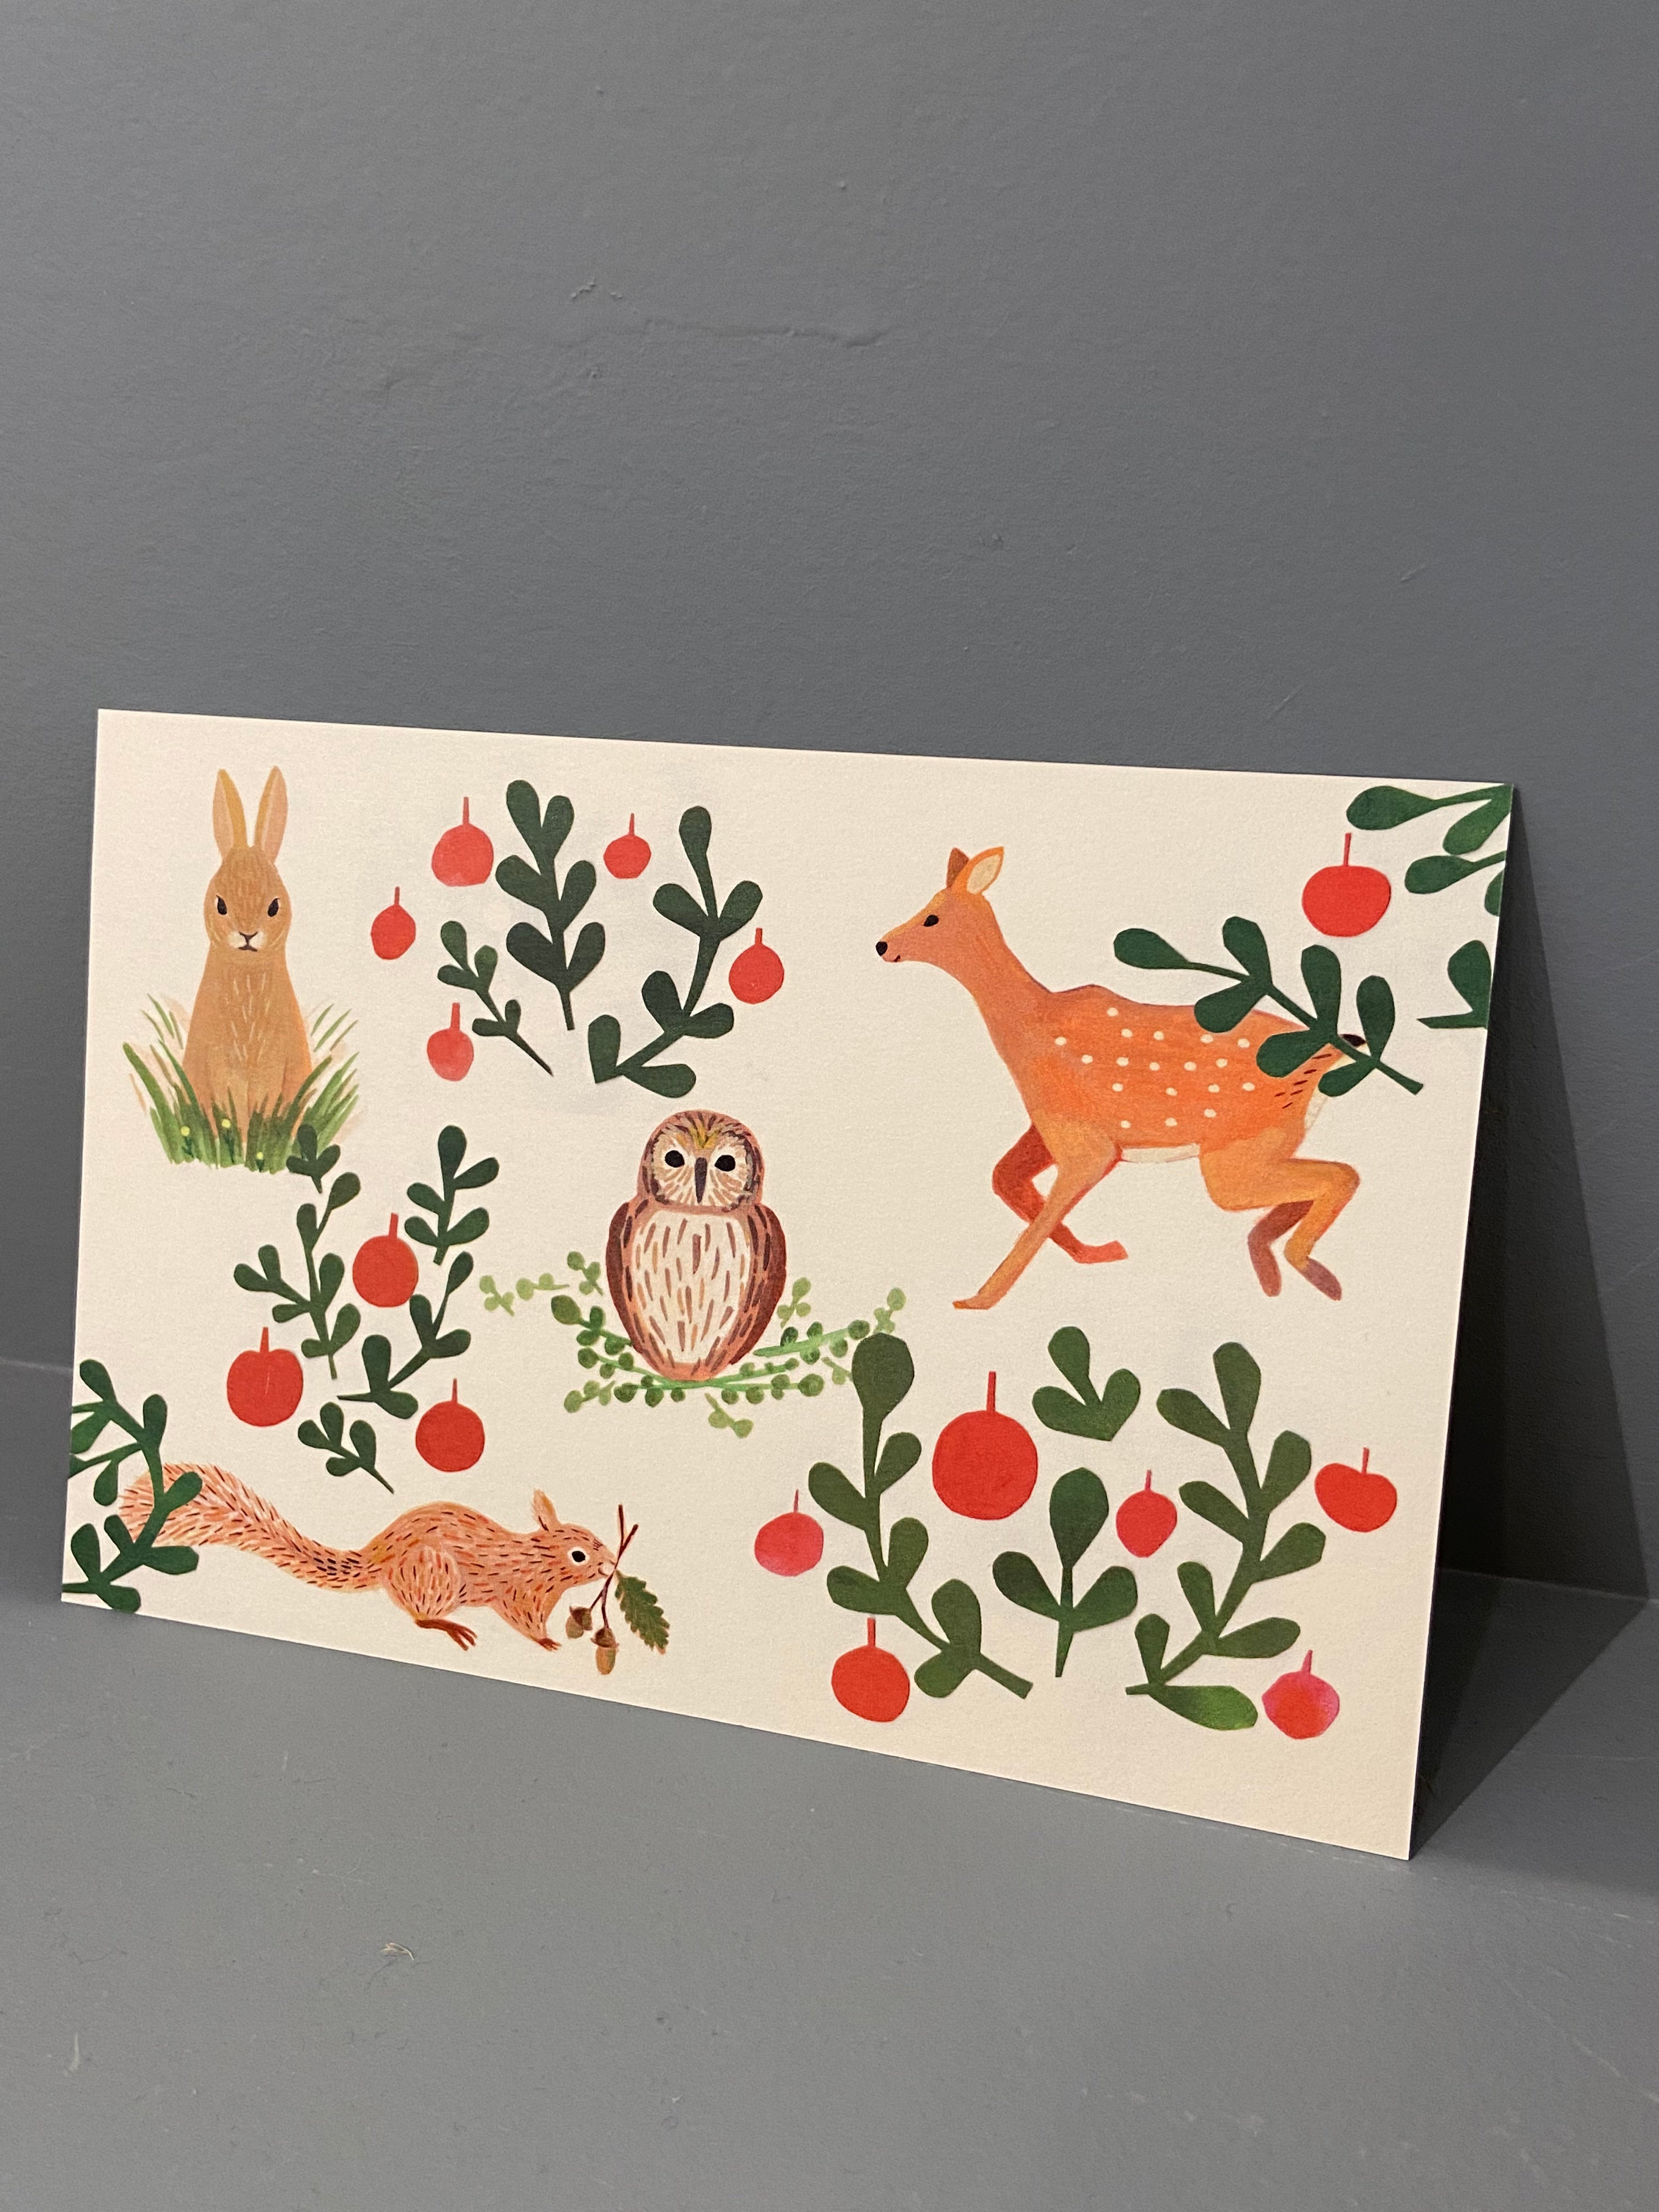 Postcard - Forest animals with red berries